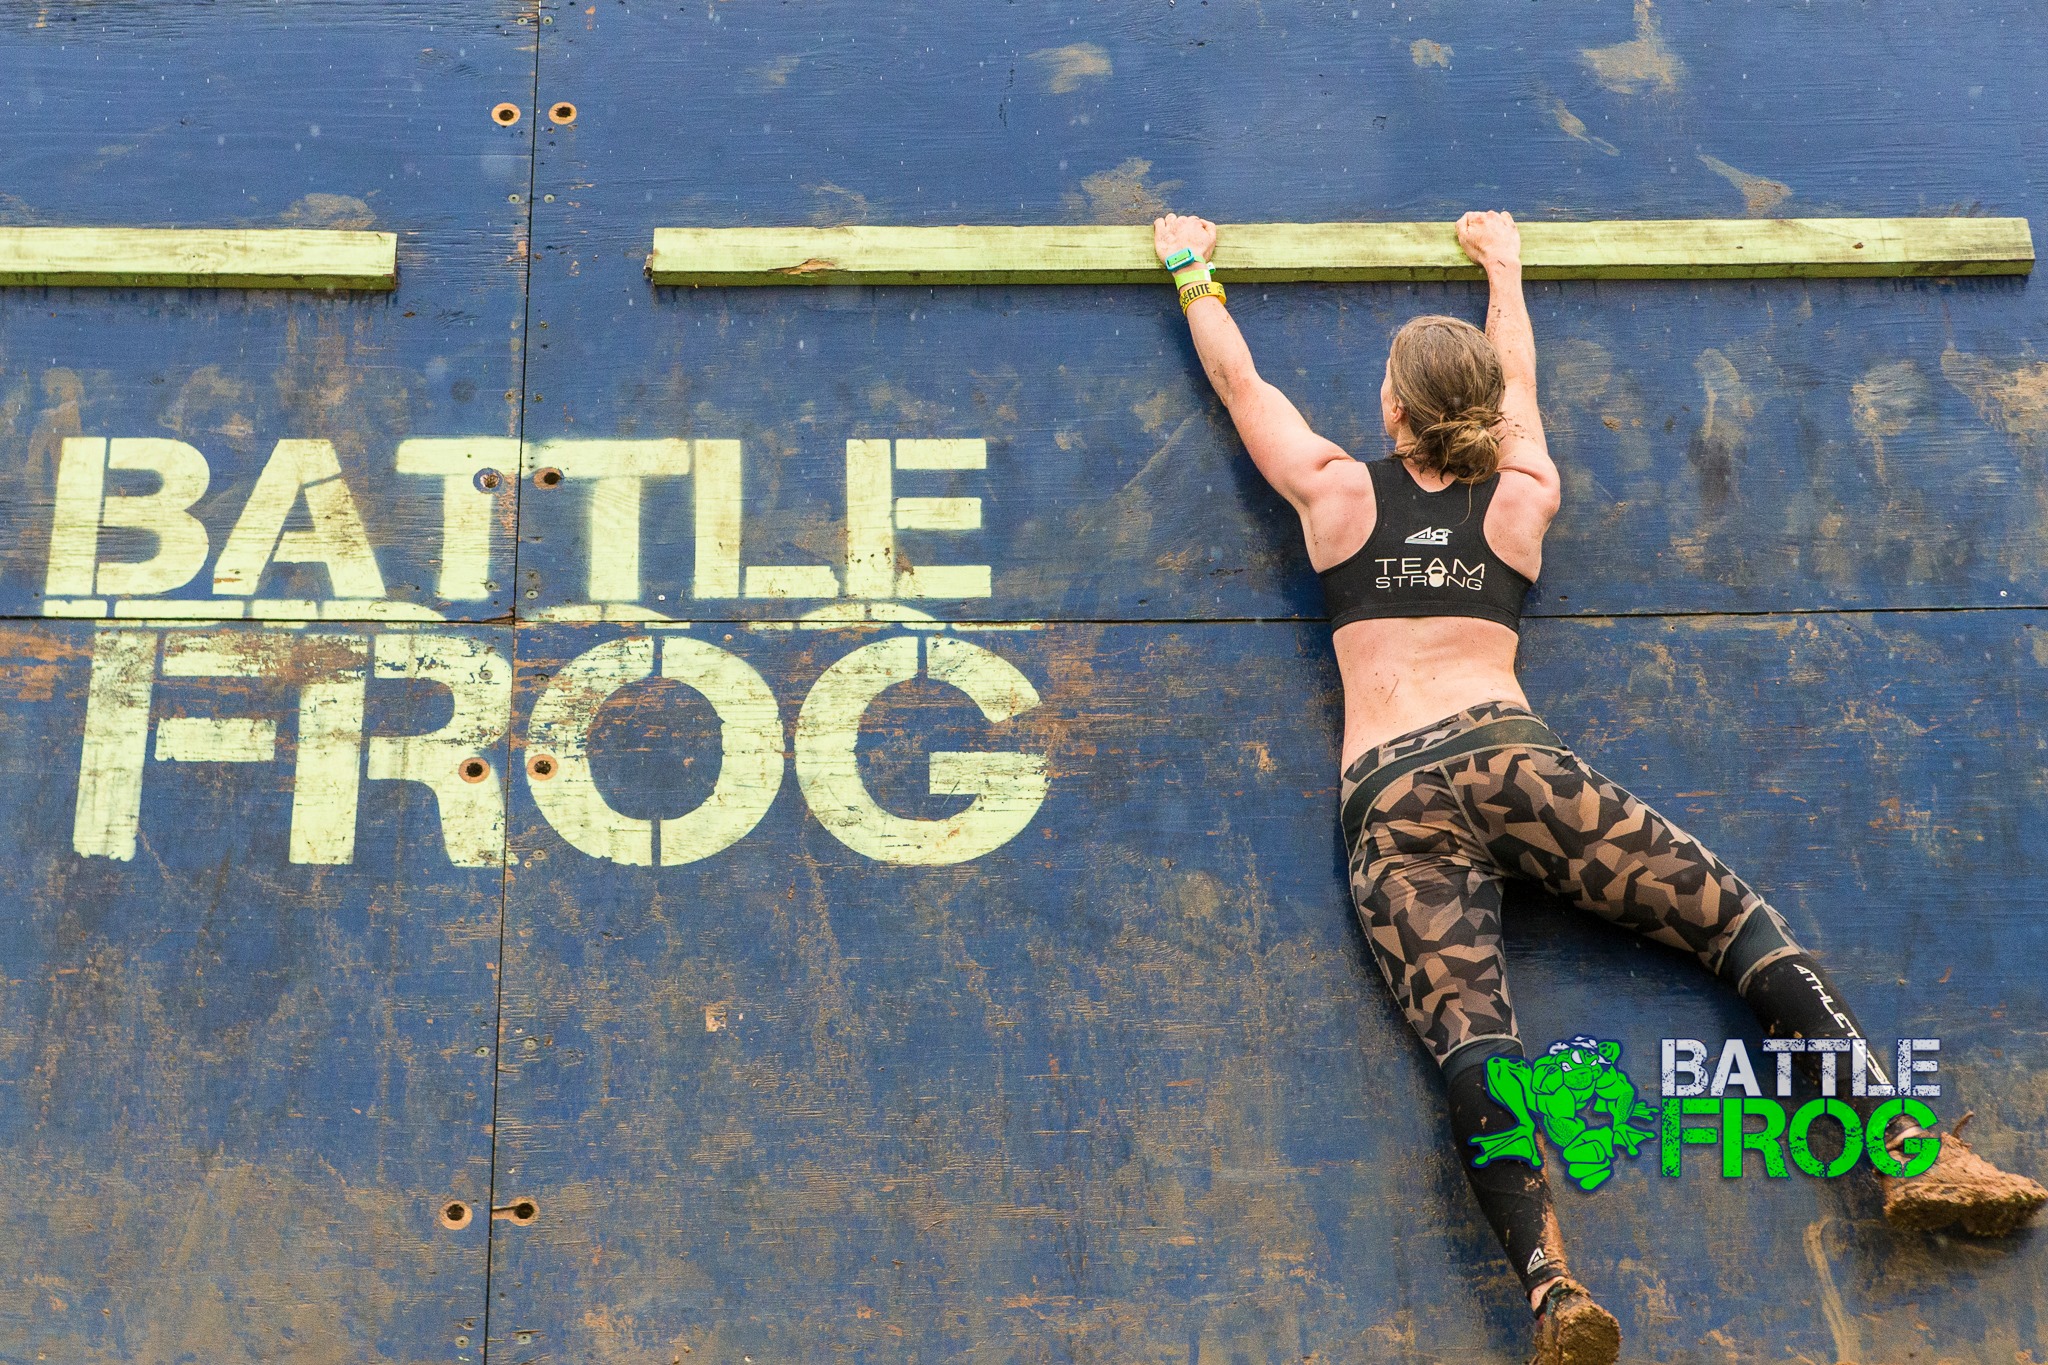 BattleFrog Family Fun Obstacle Race